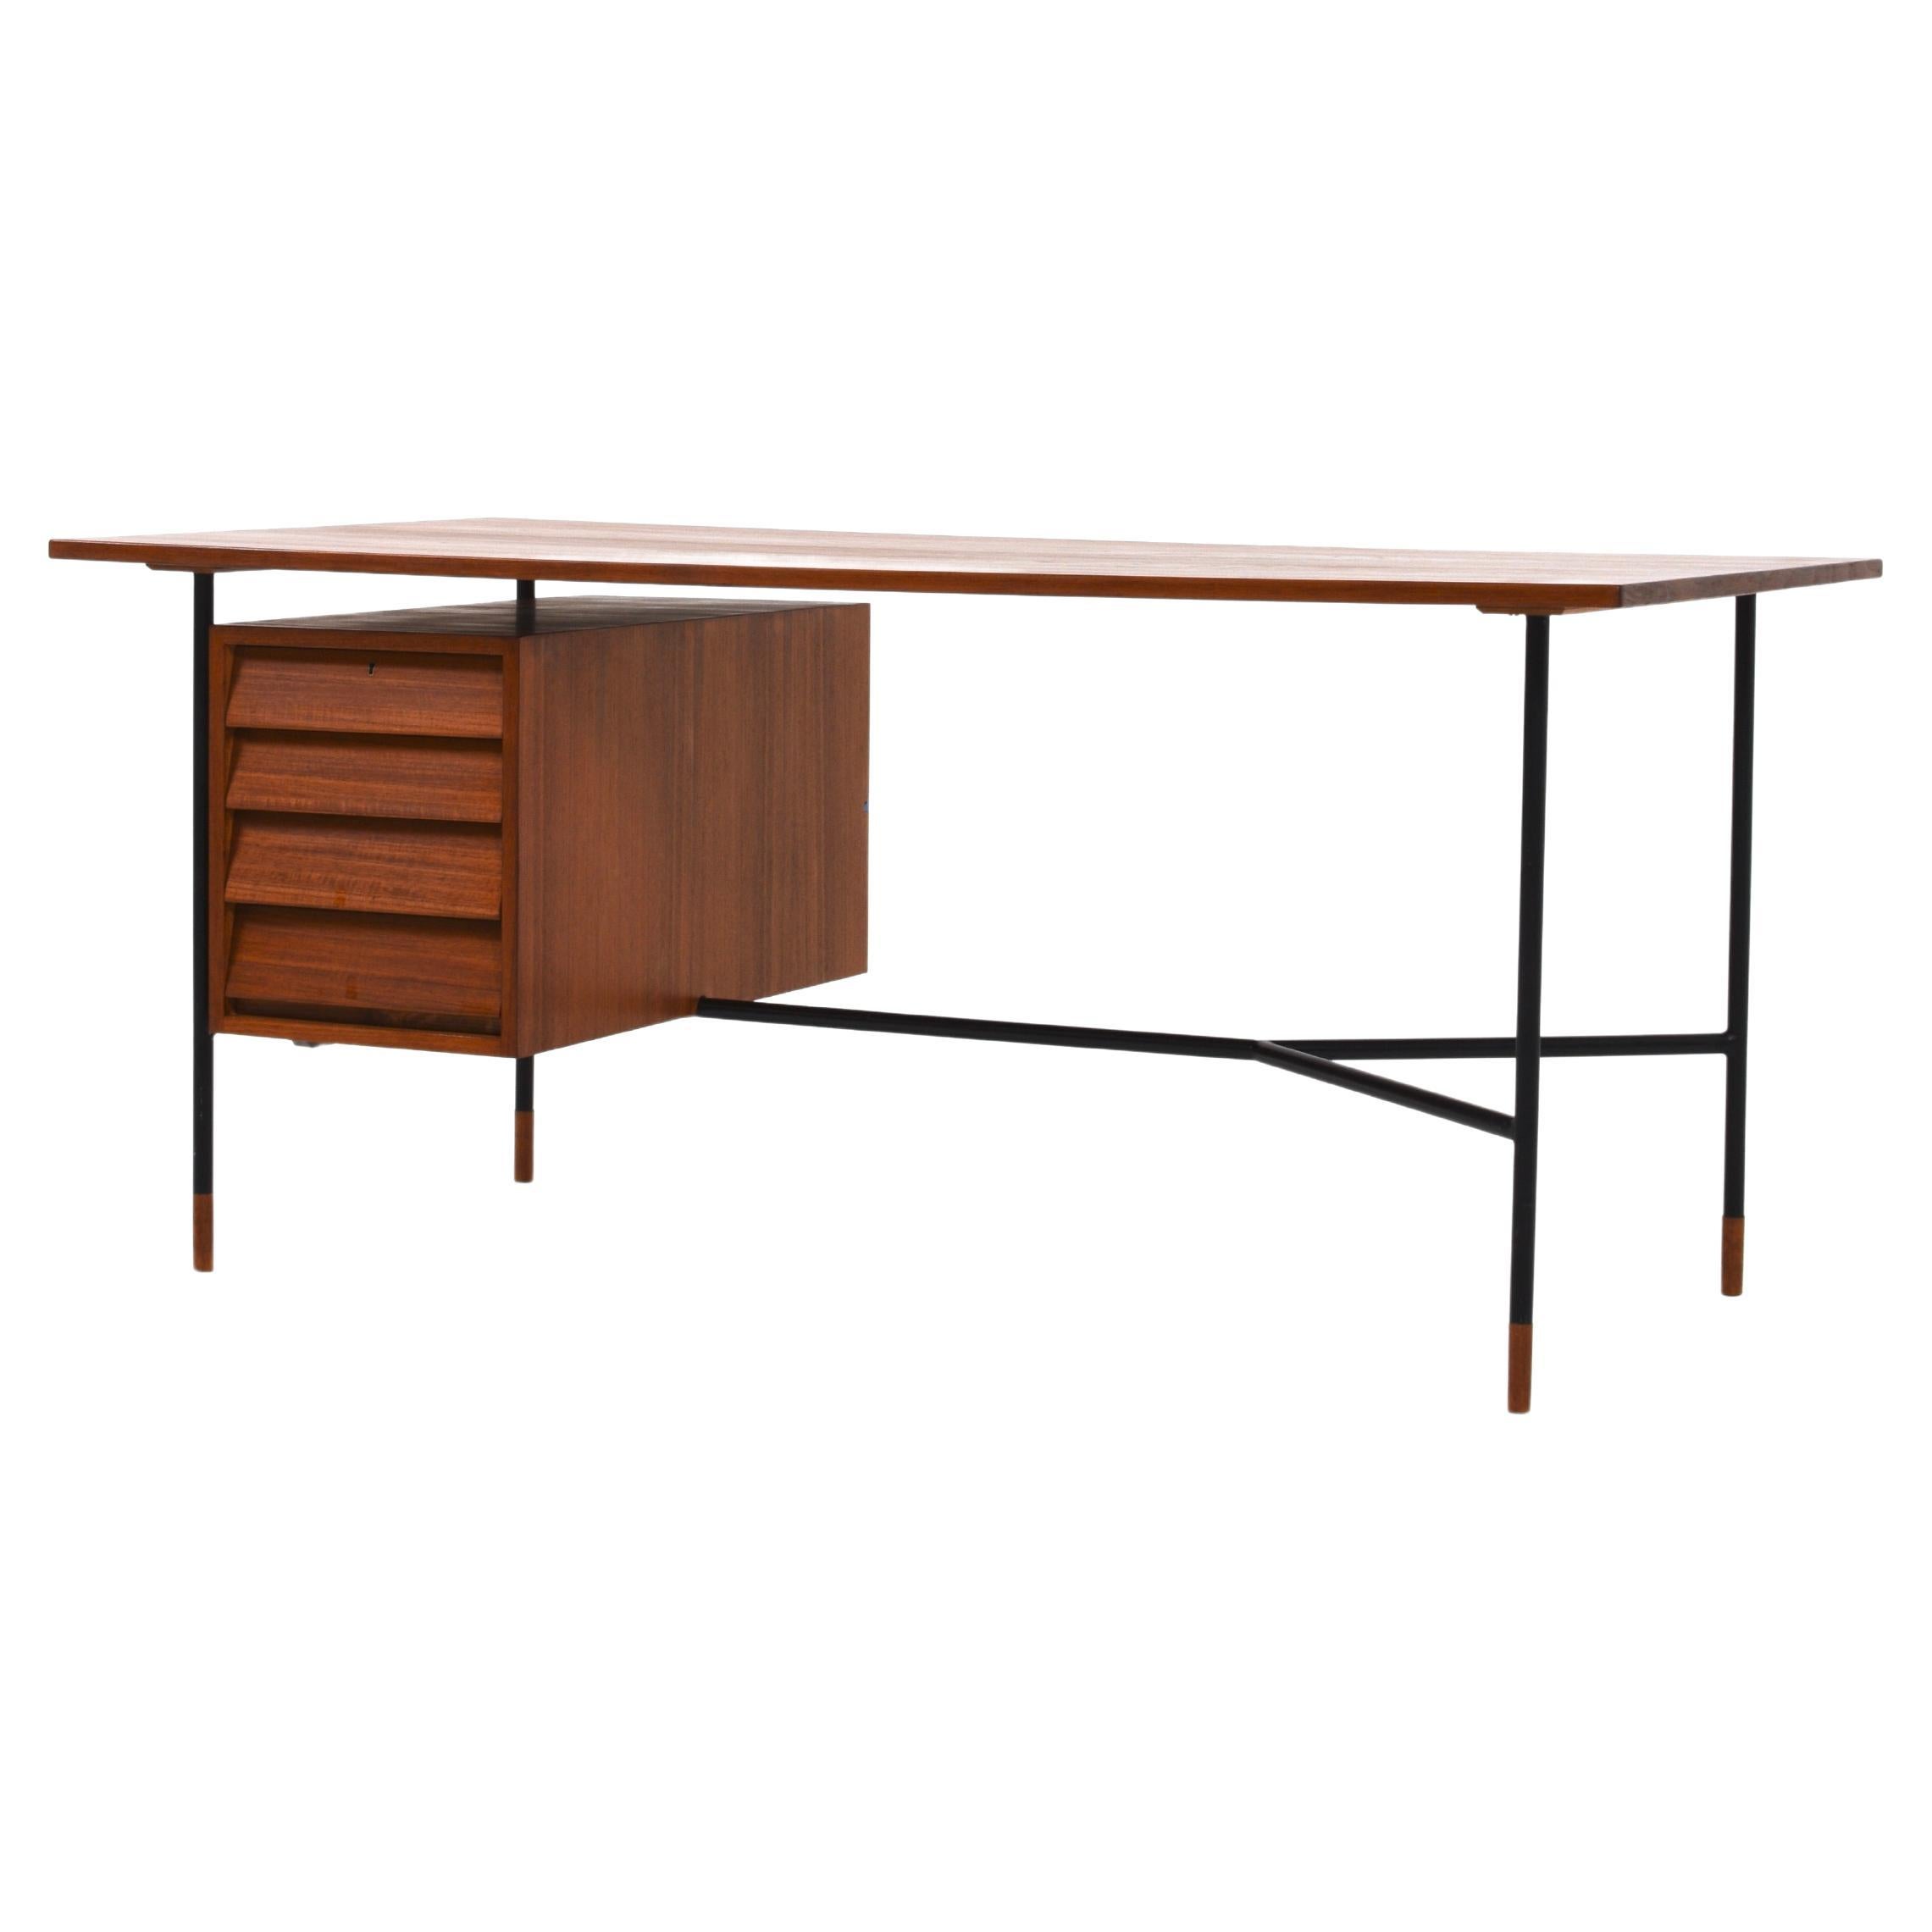 Rare Desk H-55 by Åke Hassbjer in teak and steel base, 1950s For Sale